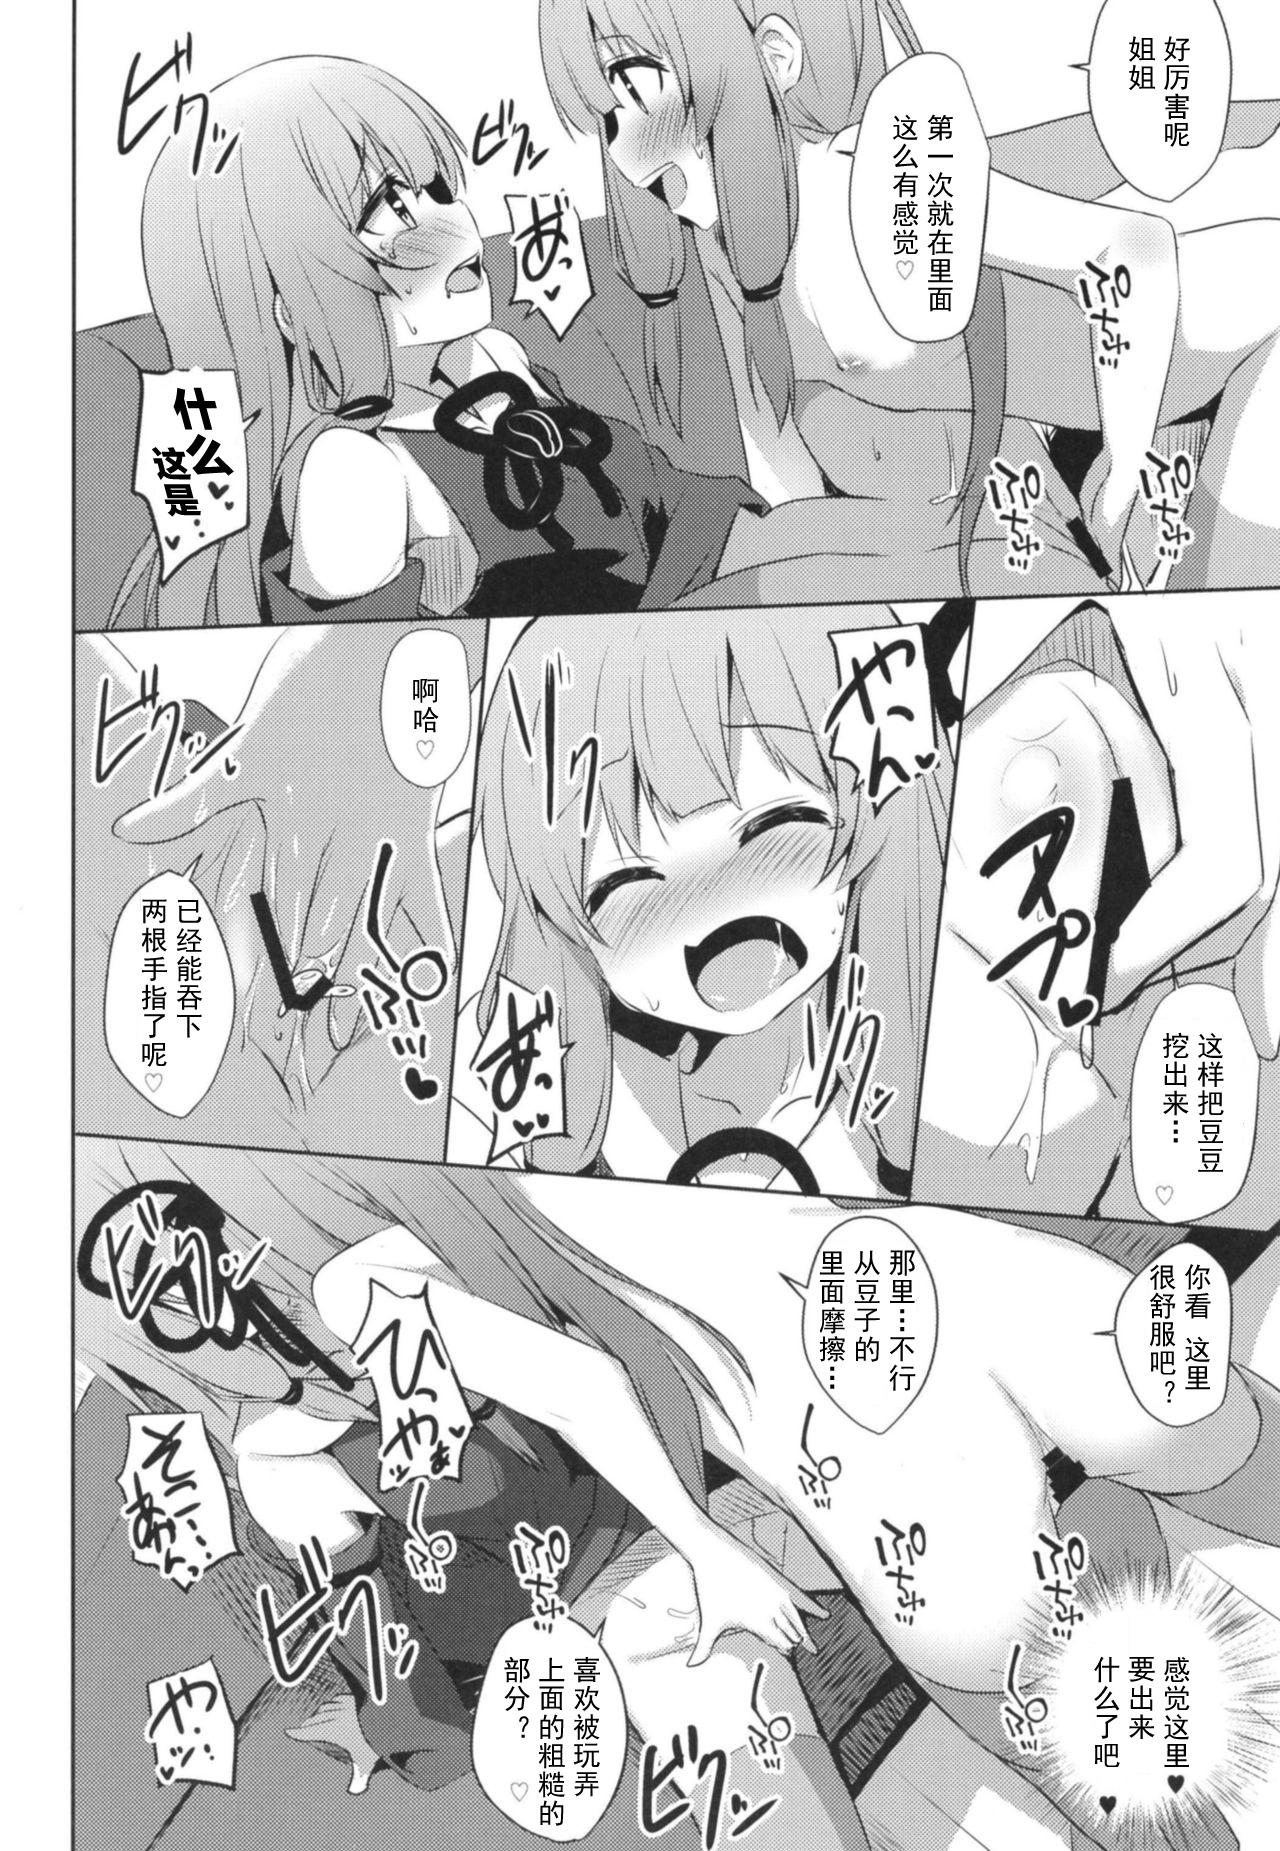 Anal [Milk Pudding (Jamcy)] Akane-chan Challenge! 4-kaime (VOICEROID) [Chinese] [古早个人汉化] [Digital] - Voiceroid Ethnic - Page 8